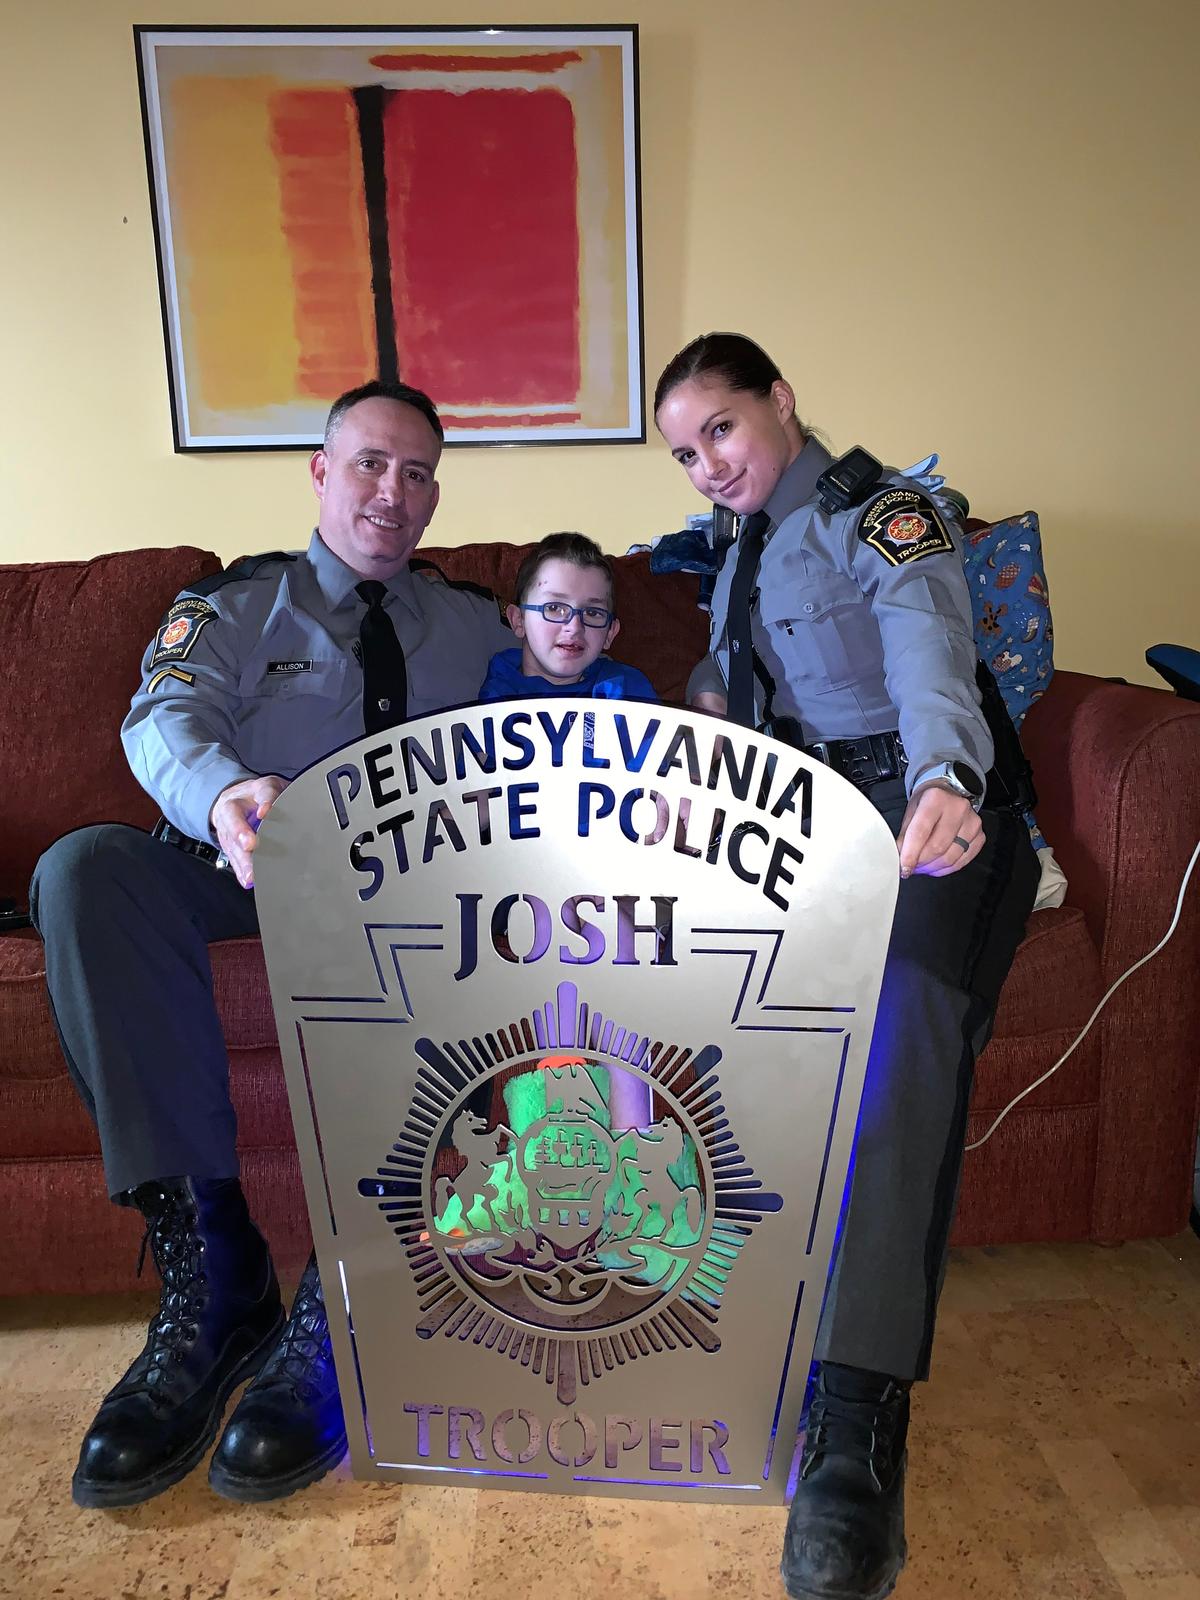 Josh with the officers from Pennsylvania State Police during his spinal surgery in Pittsburg. Trooper Allison (L) is still in touch with Josh, and he even visited Josh after surgery and rubbed his legs and talked with him for hours to help stop his pain and muscle spasms. (Courtesy of <a href="https://www.facebook.com/rebecca.bourassa.3">Rebecca Bourassa</a>)